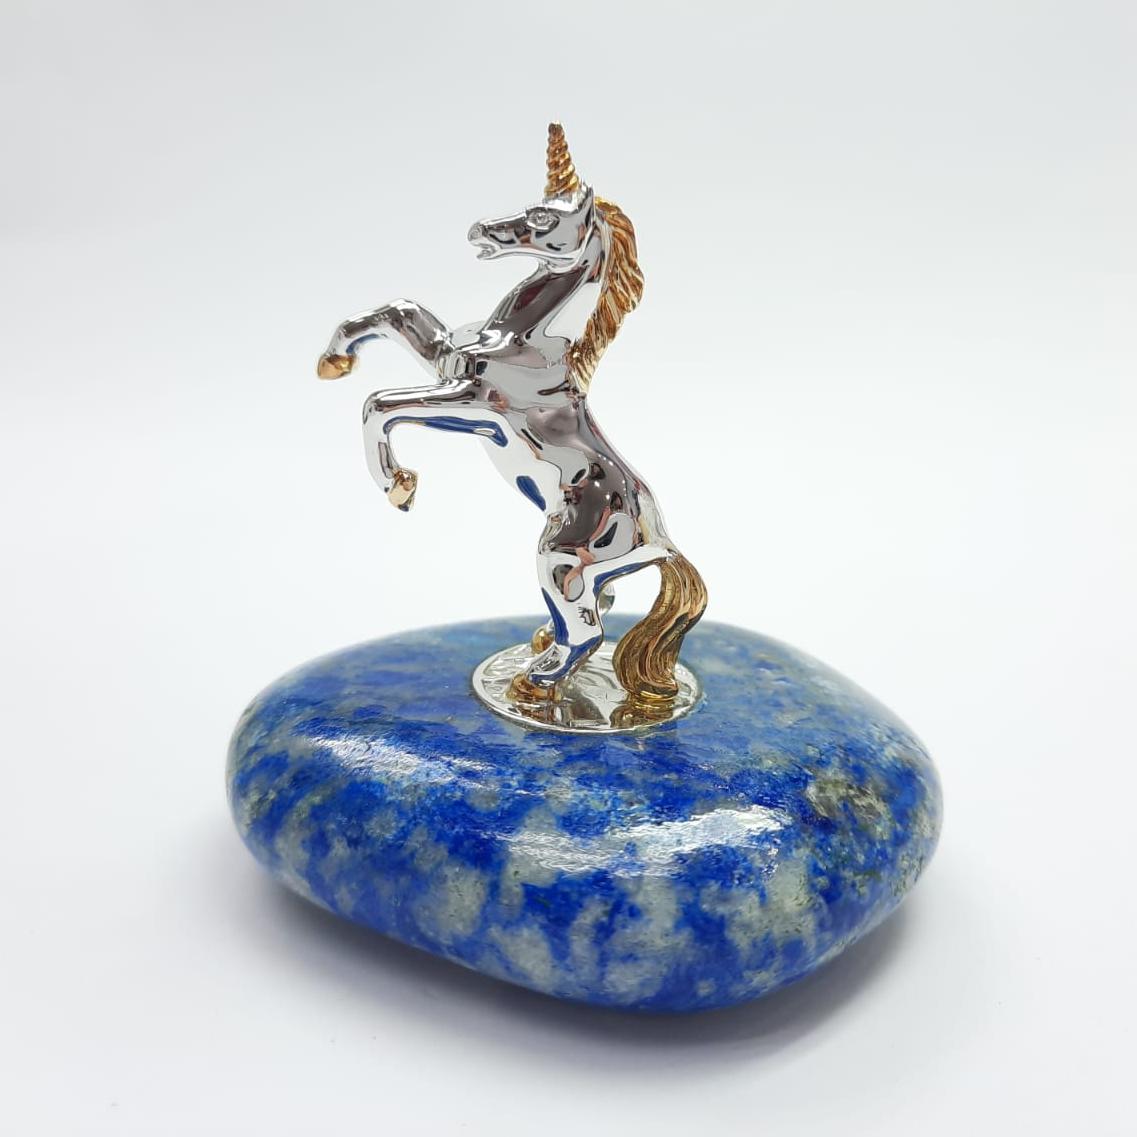 The legendary unicorn embodies toleration, dignity, care and purity. This gift is a wish for longevity and enlightenment.

MOISEIKIN® embodied the images of energetic, tough and freedom loving horse on the precious metal and lazurite which was